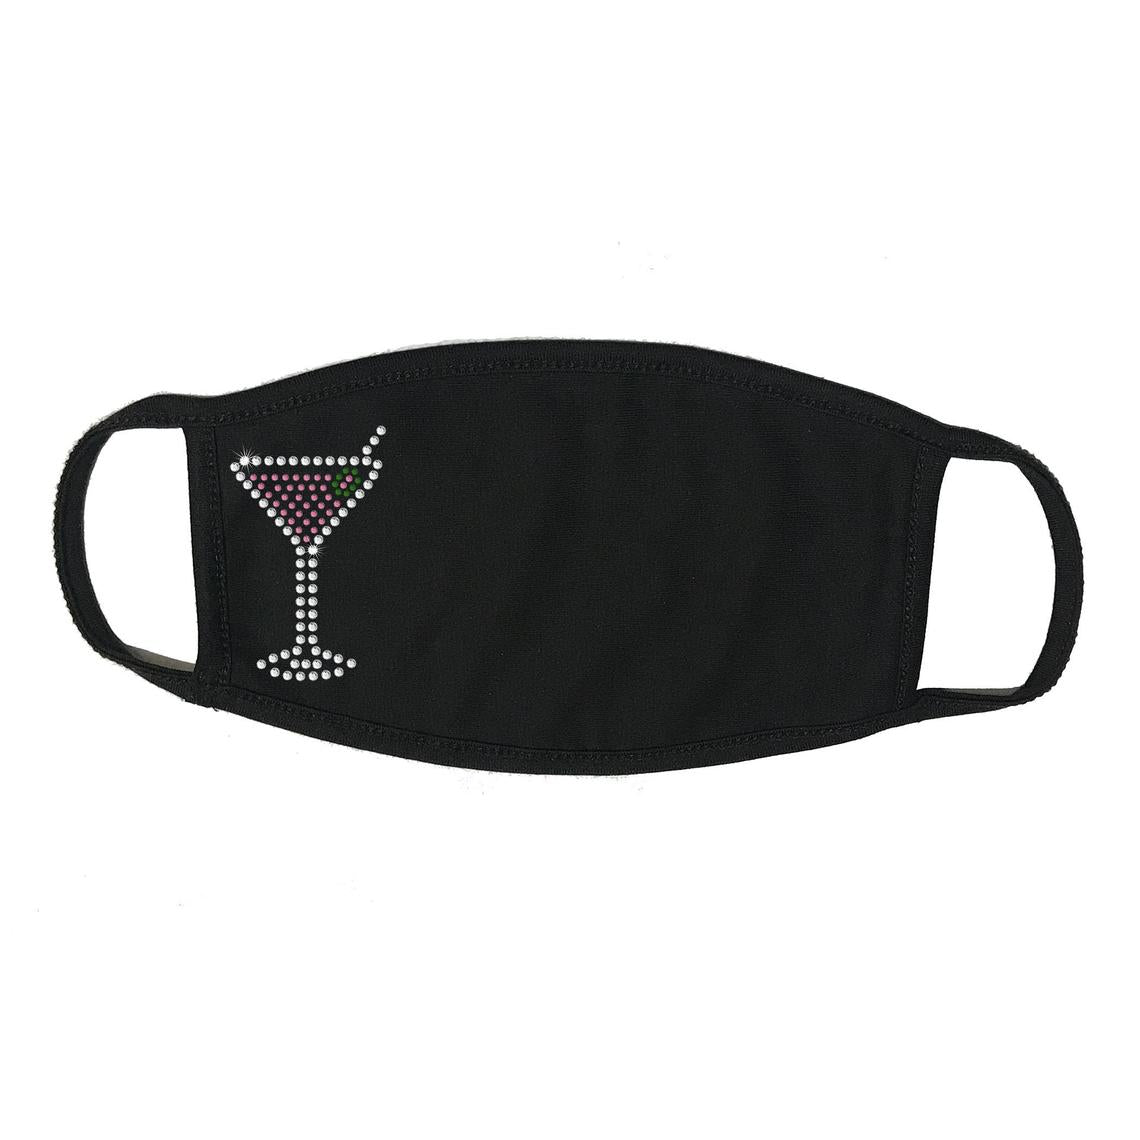 Rhinestone Embellished BLACK Face Mask, Face Cover with Martini Drink